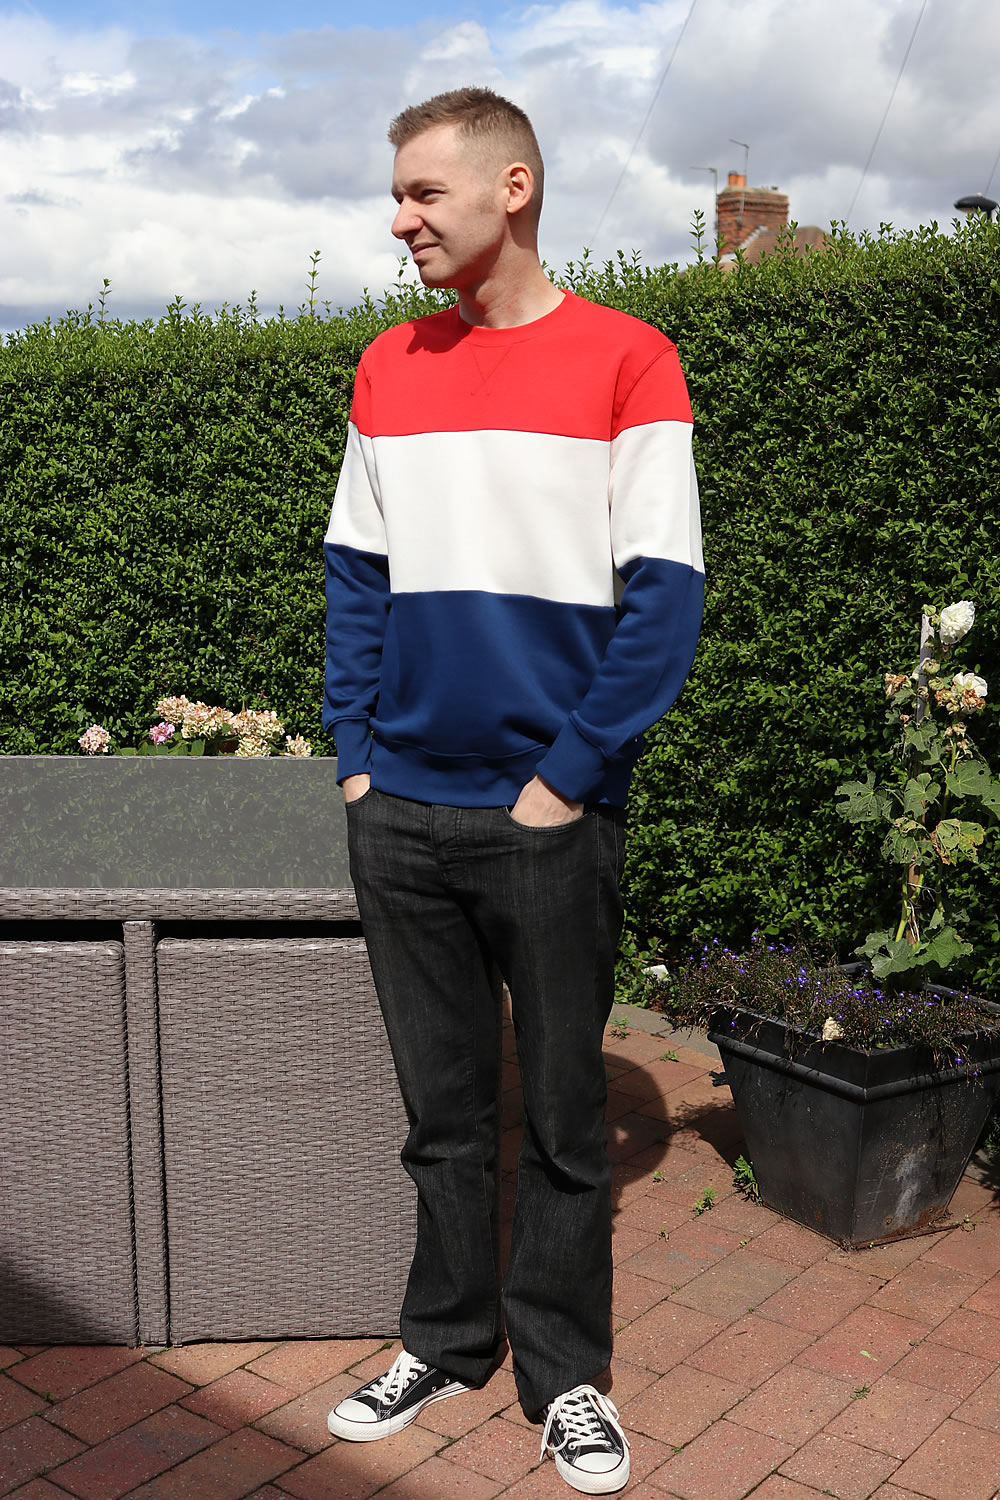 Today's Style: H&M Sweatshirt In Red, White & Blue | Michael 84